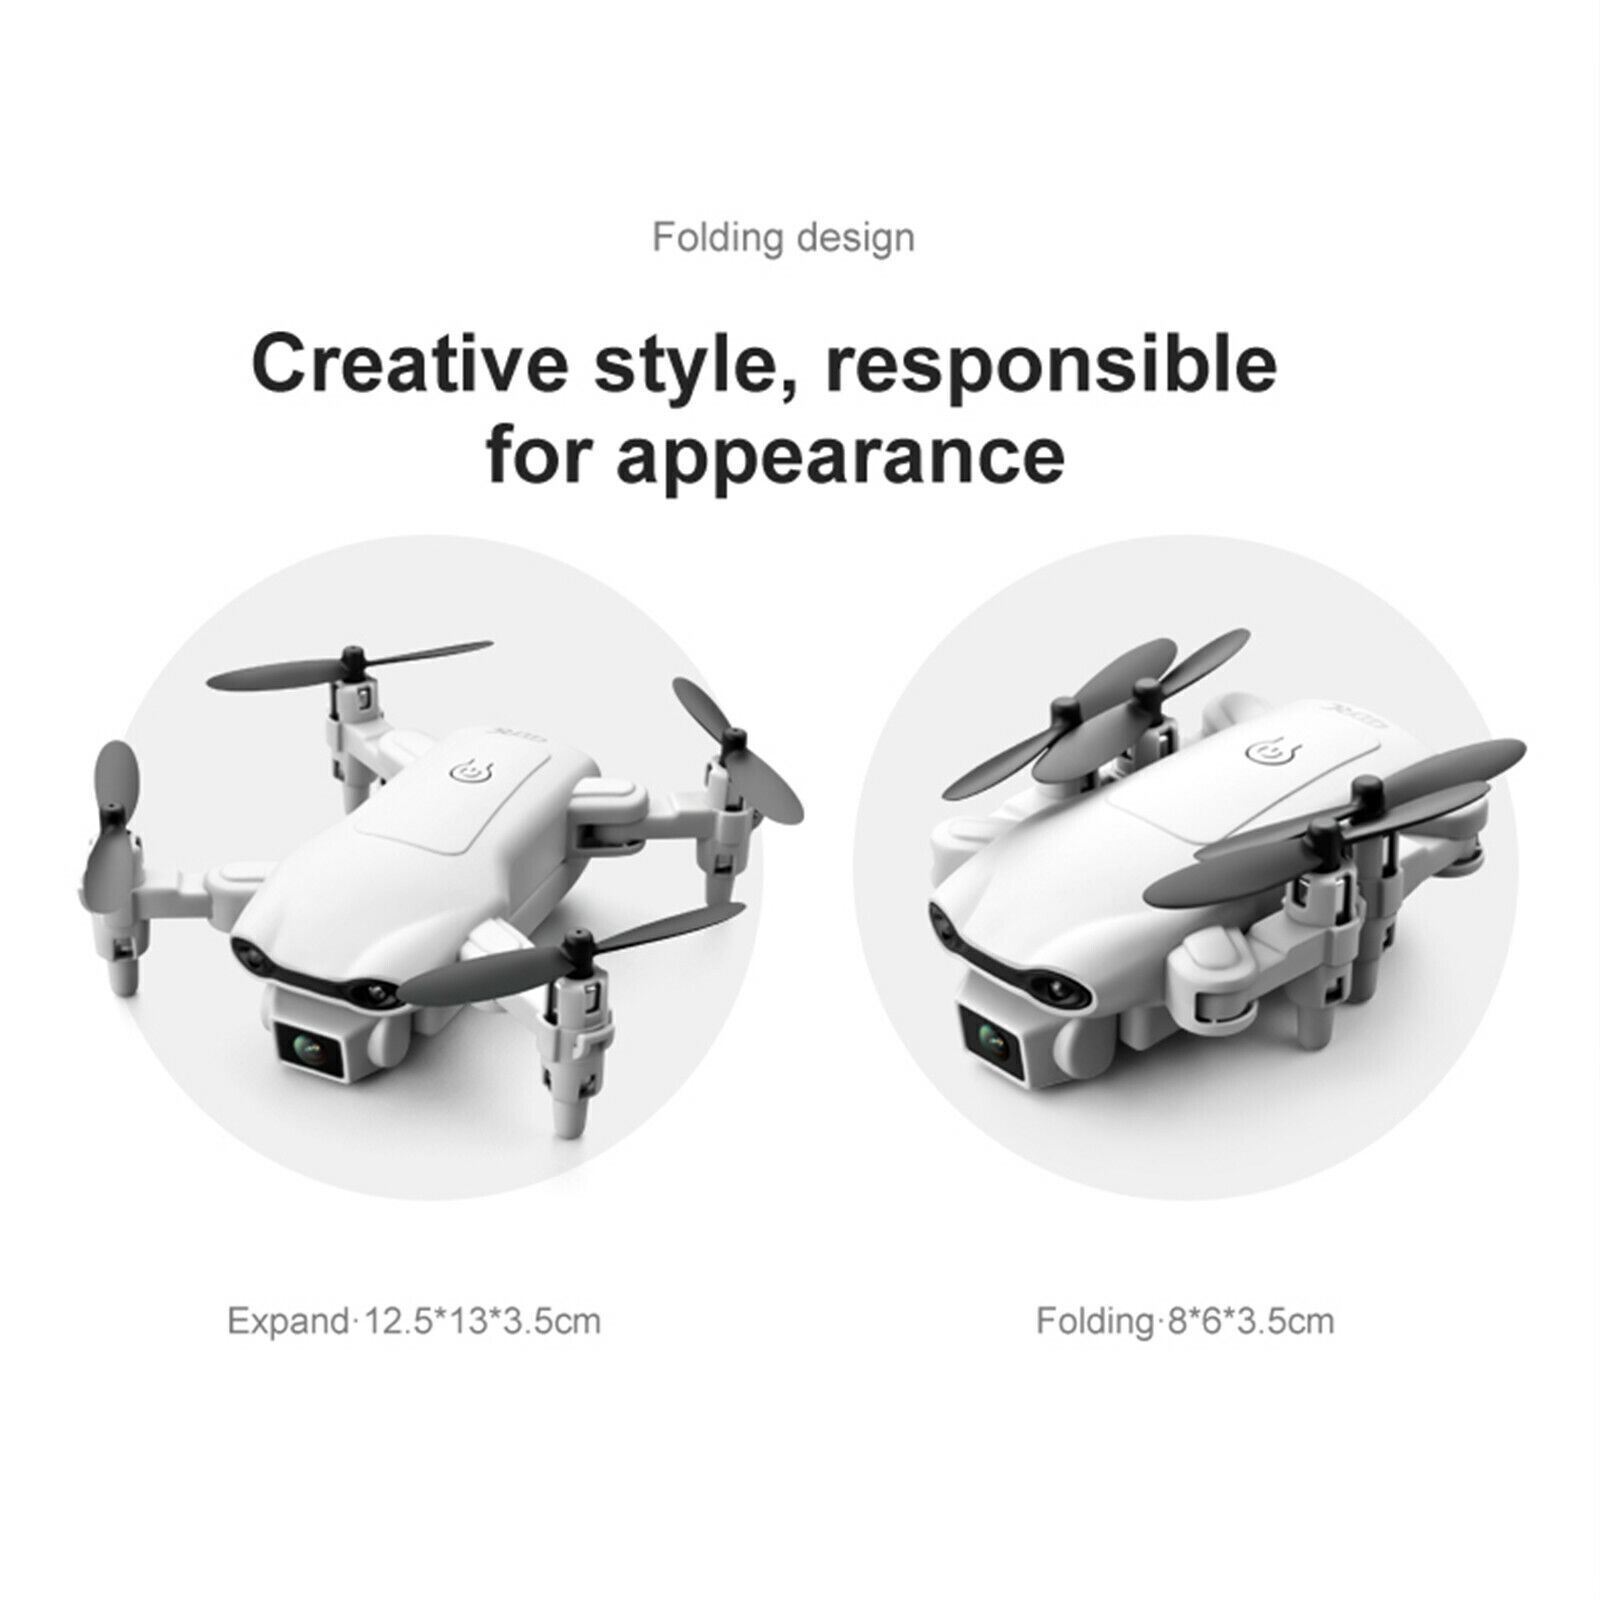 2021 RC Drone with Dual Cameras & WIFI